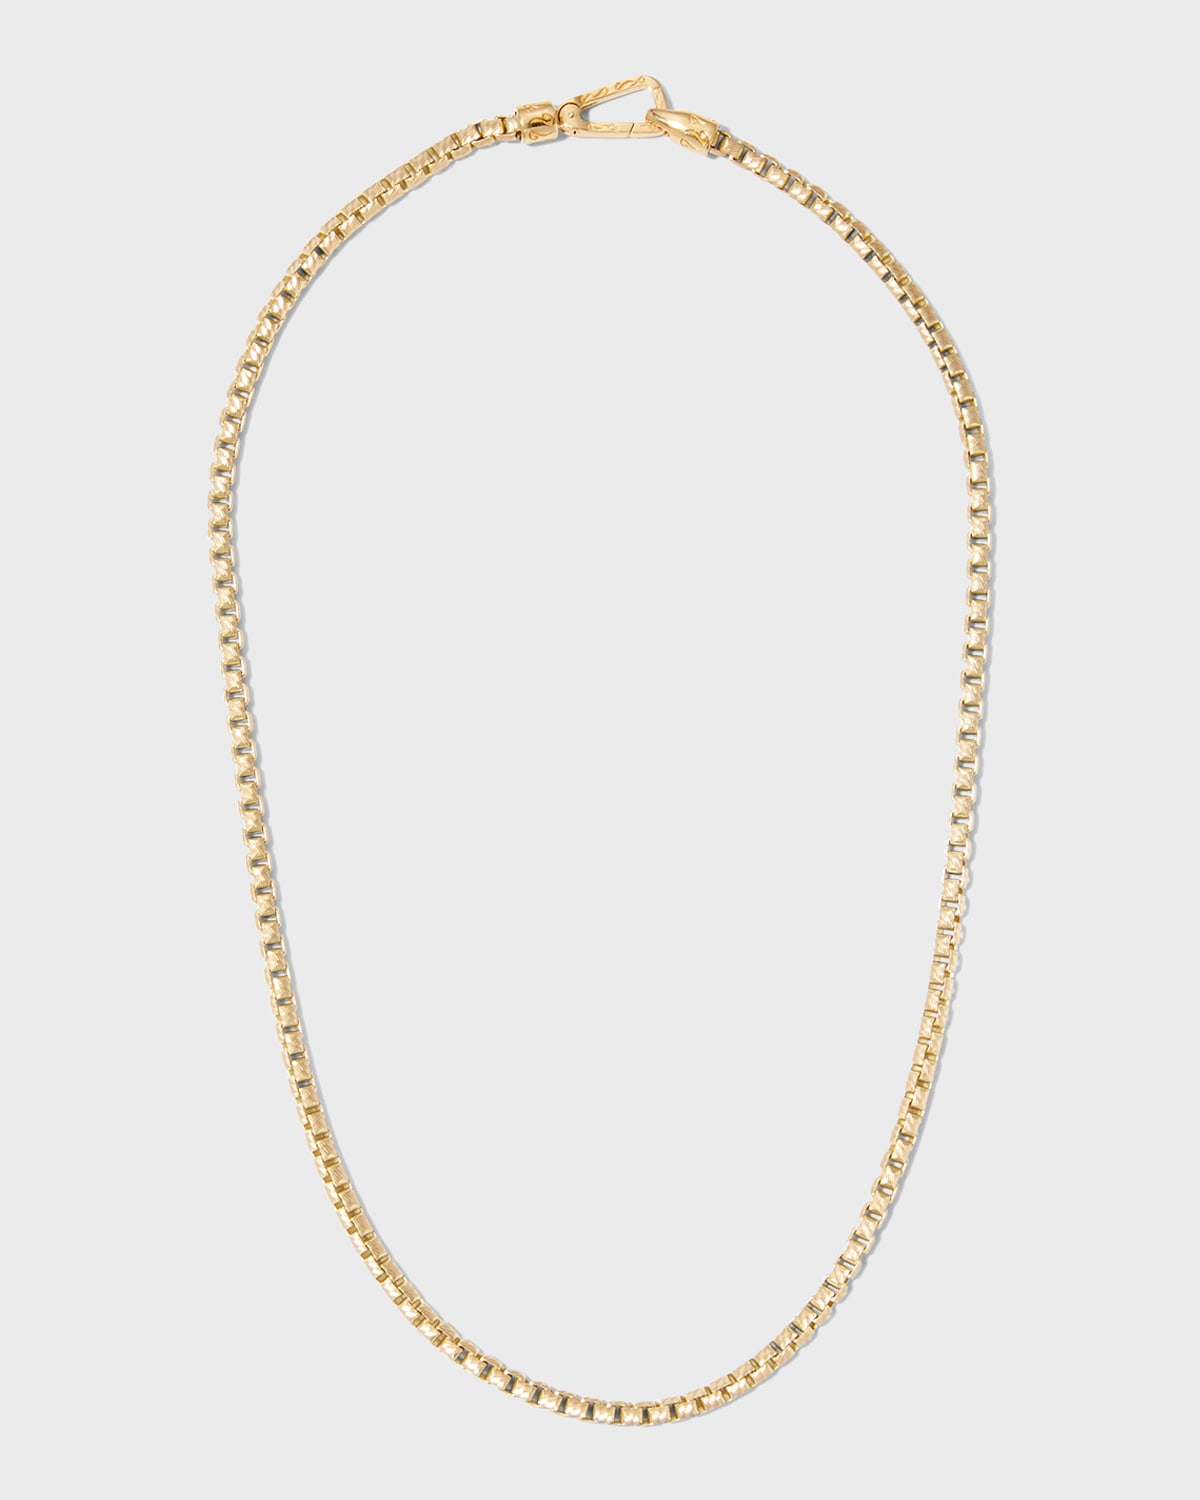 Men's Yellow Gold Carved Tubular Necklace with Matte Chain, 52cm